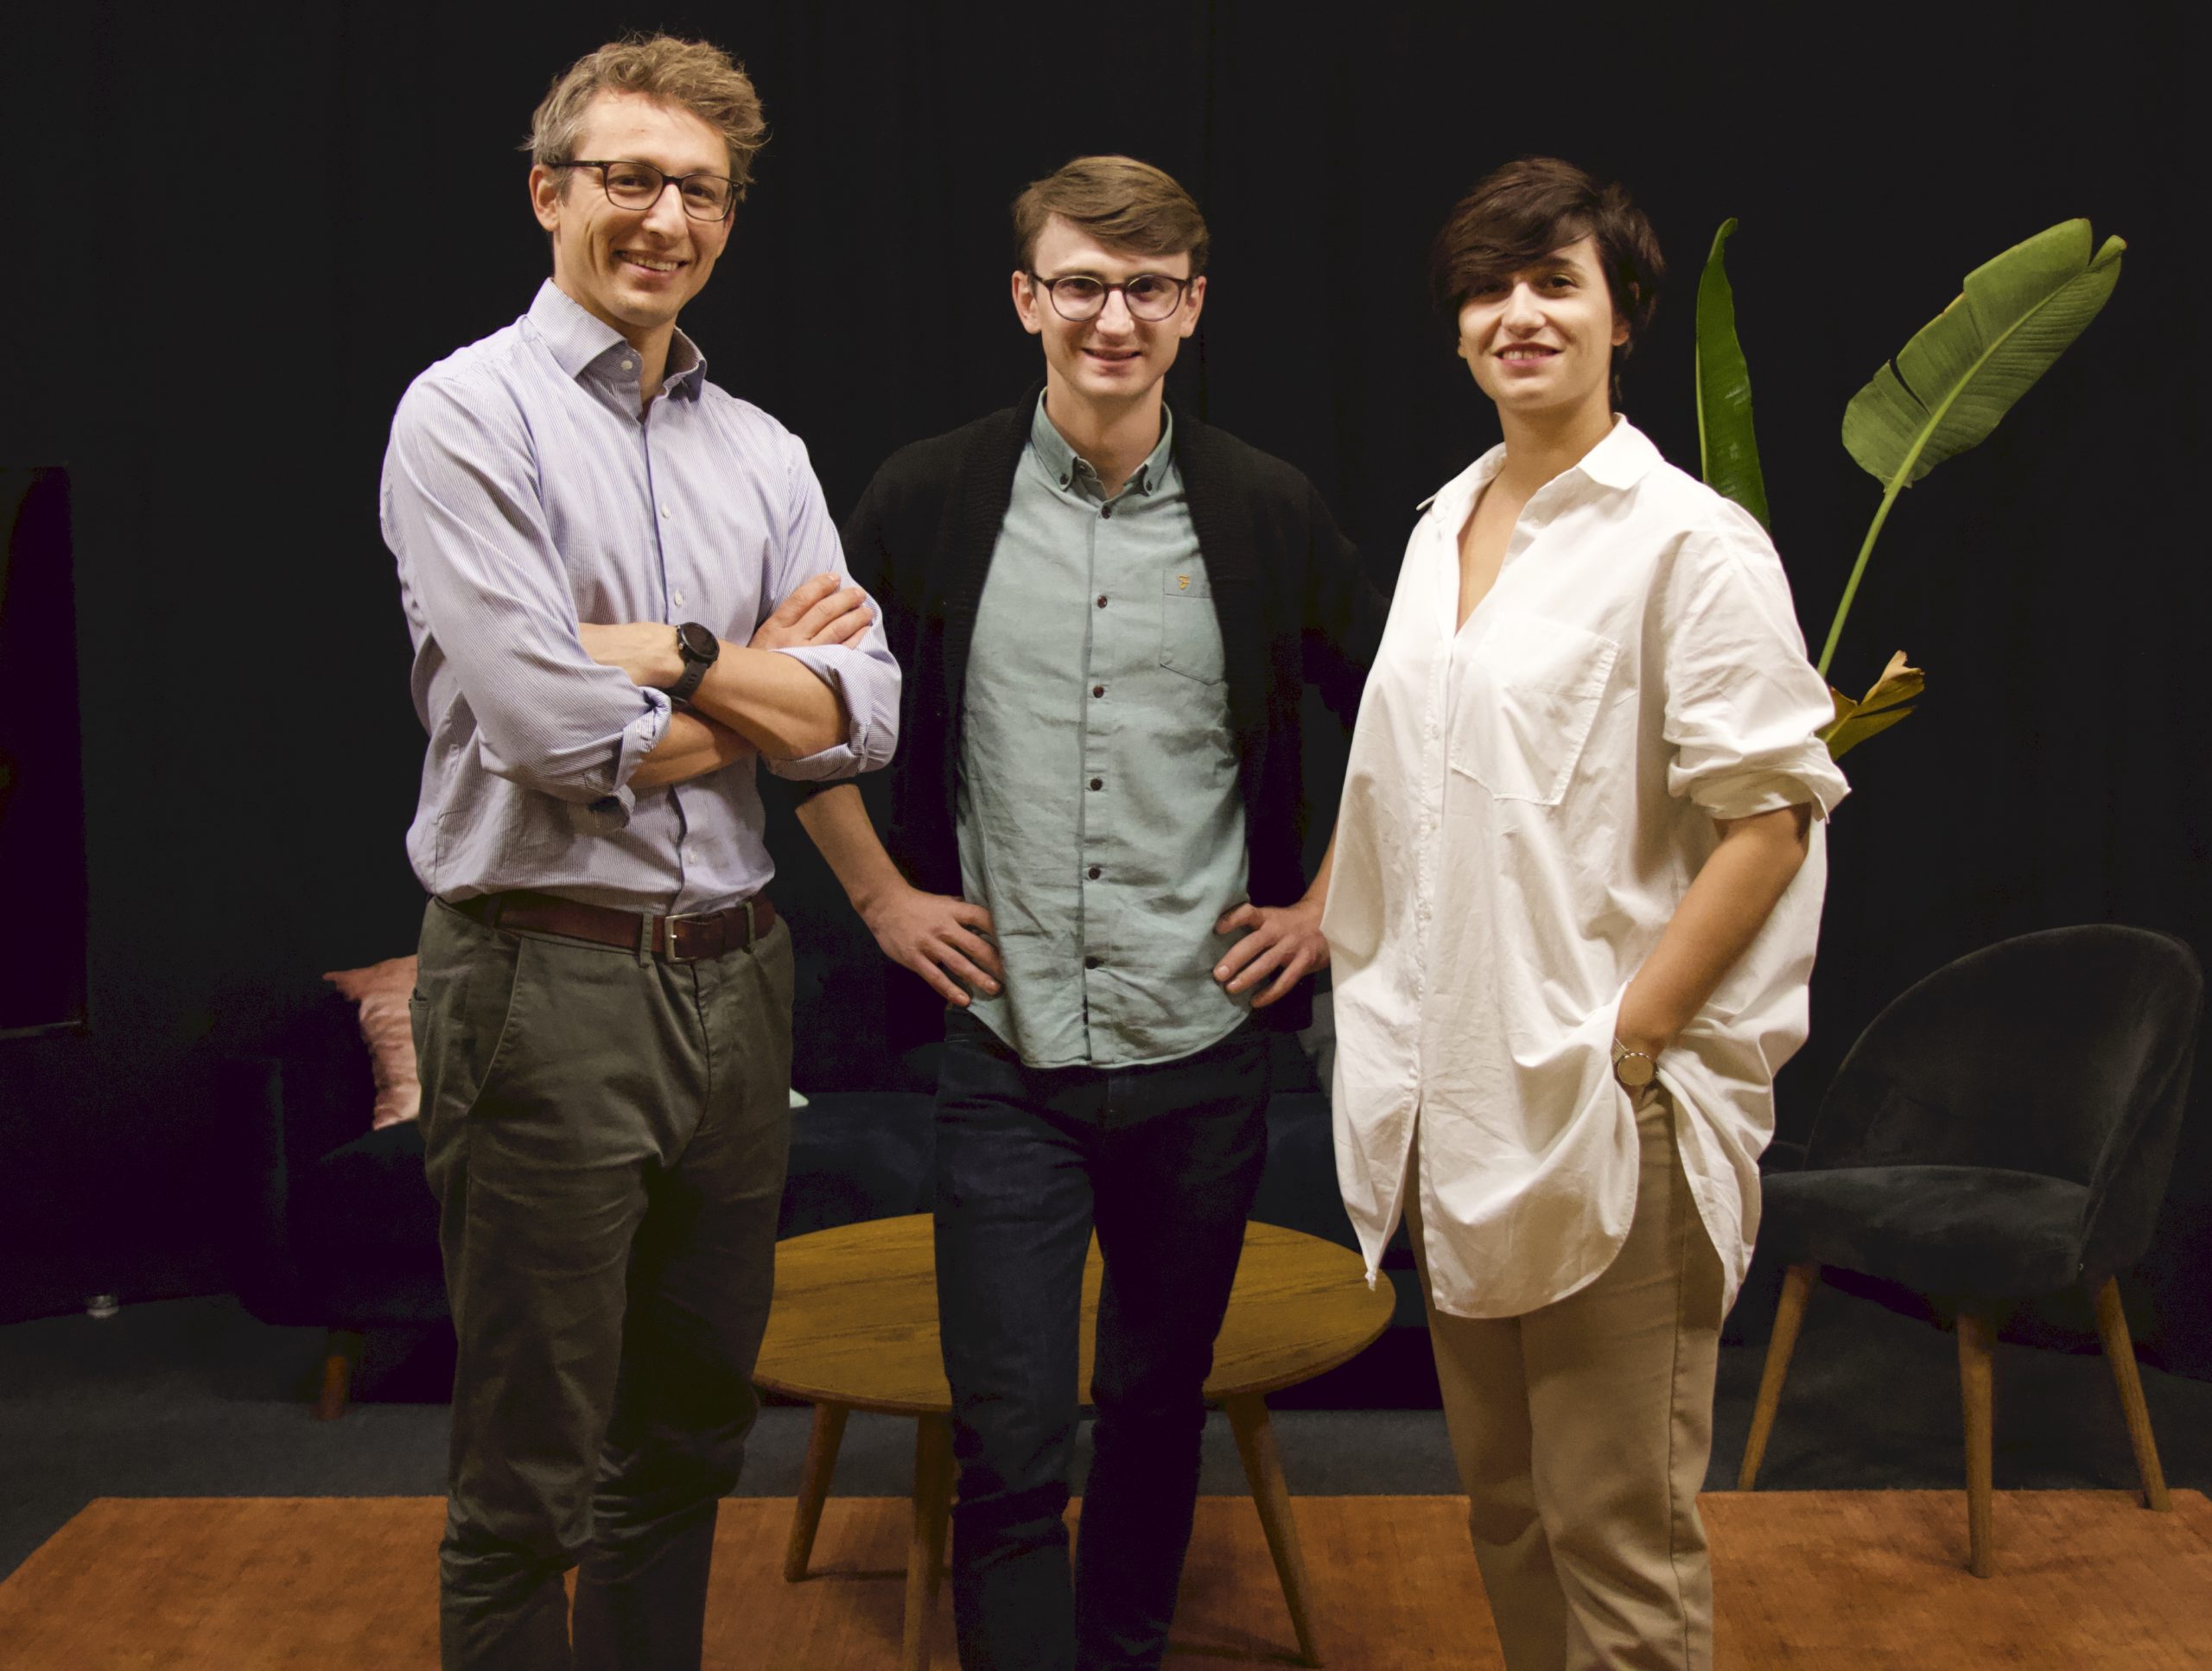 Jakob Detering (left) and his successors Jonas Dinger (middle) and Ana Janošev (right), new managing directors of Social Impact Award